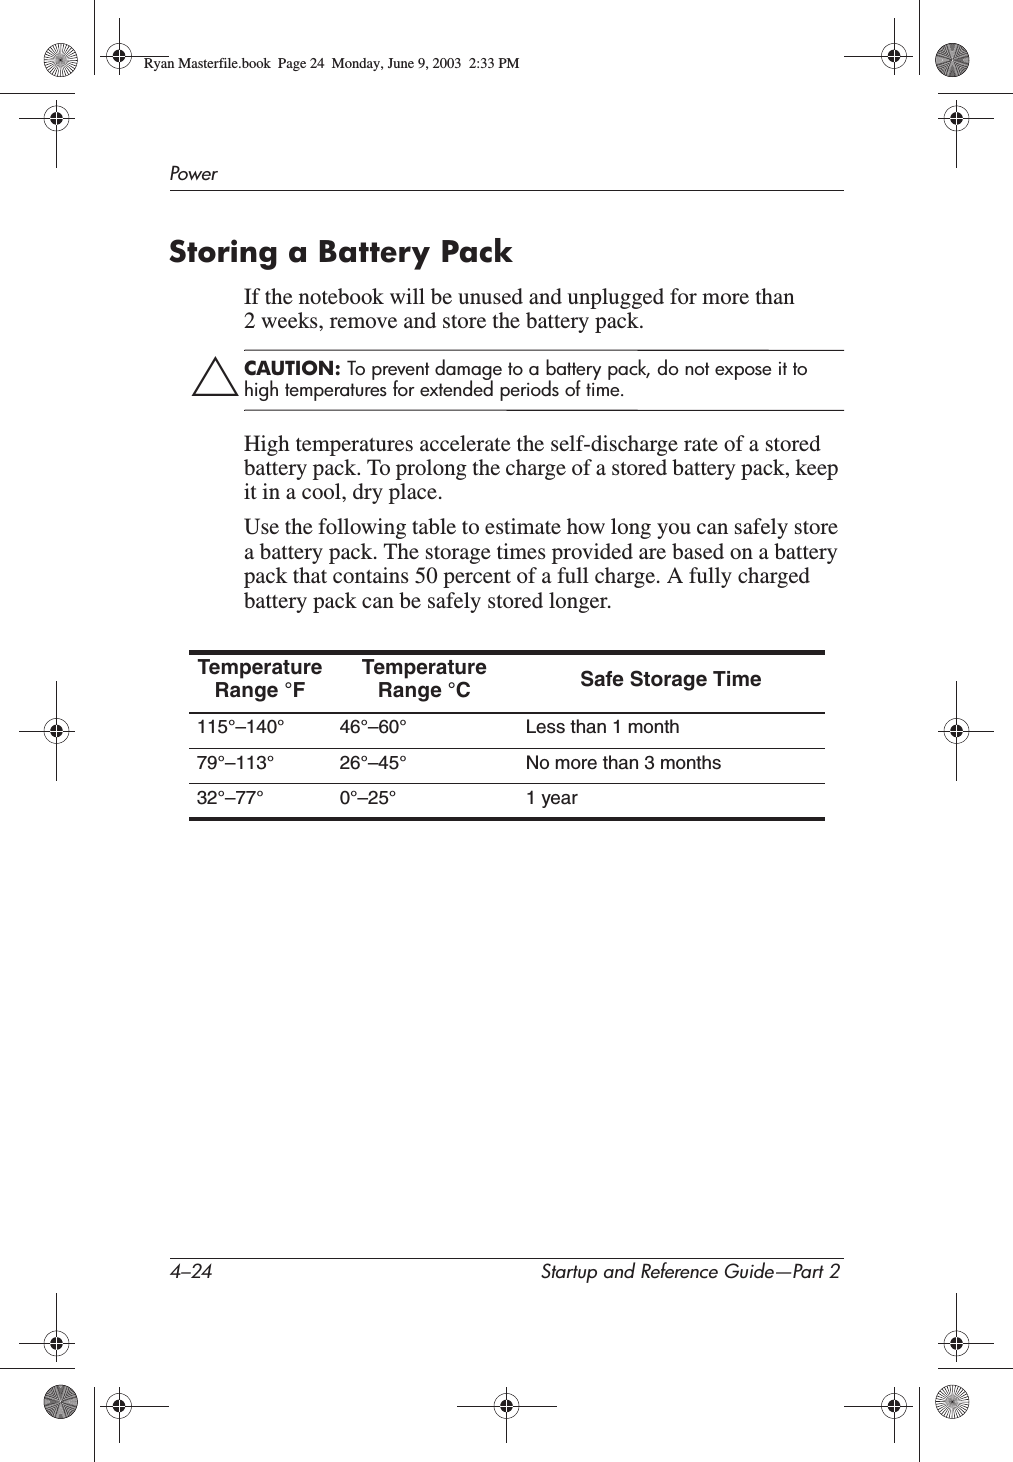 4–24 Startup and Reference Guide—Part 2PowerStoring a Battery PackIf the notebook will be unused and unplugged for more than 2 weeks, remove and store the battery pack.ÄCAUTION: To prevent damage to a battery pack, do not expose it to high temperatures for extended periods of time.High temperatures accelerate the self-discharge rate of a stored battery pack. To prolong the charge of a stored battery pack, keep it in a cool, dry place.Use the following table to estimate how long you can safely store a battery pack. The storage times provided are based on a battery pack that contains 50 percent of a full charge. A fully charged battery pack can be safely stored longer.Temperature Range °FTemperature Range °C Safe Storage Time115°–140° 46°–60° Less than 1 month79°–113° 26°–45° No more than 3 months32°–77° 0°–25° 1 yearRyan Masterfile.book  Page 24  Monday, June 9, 2003  2:33 PM